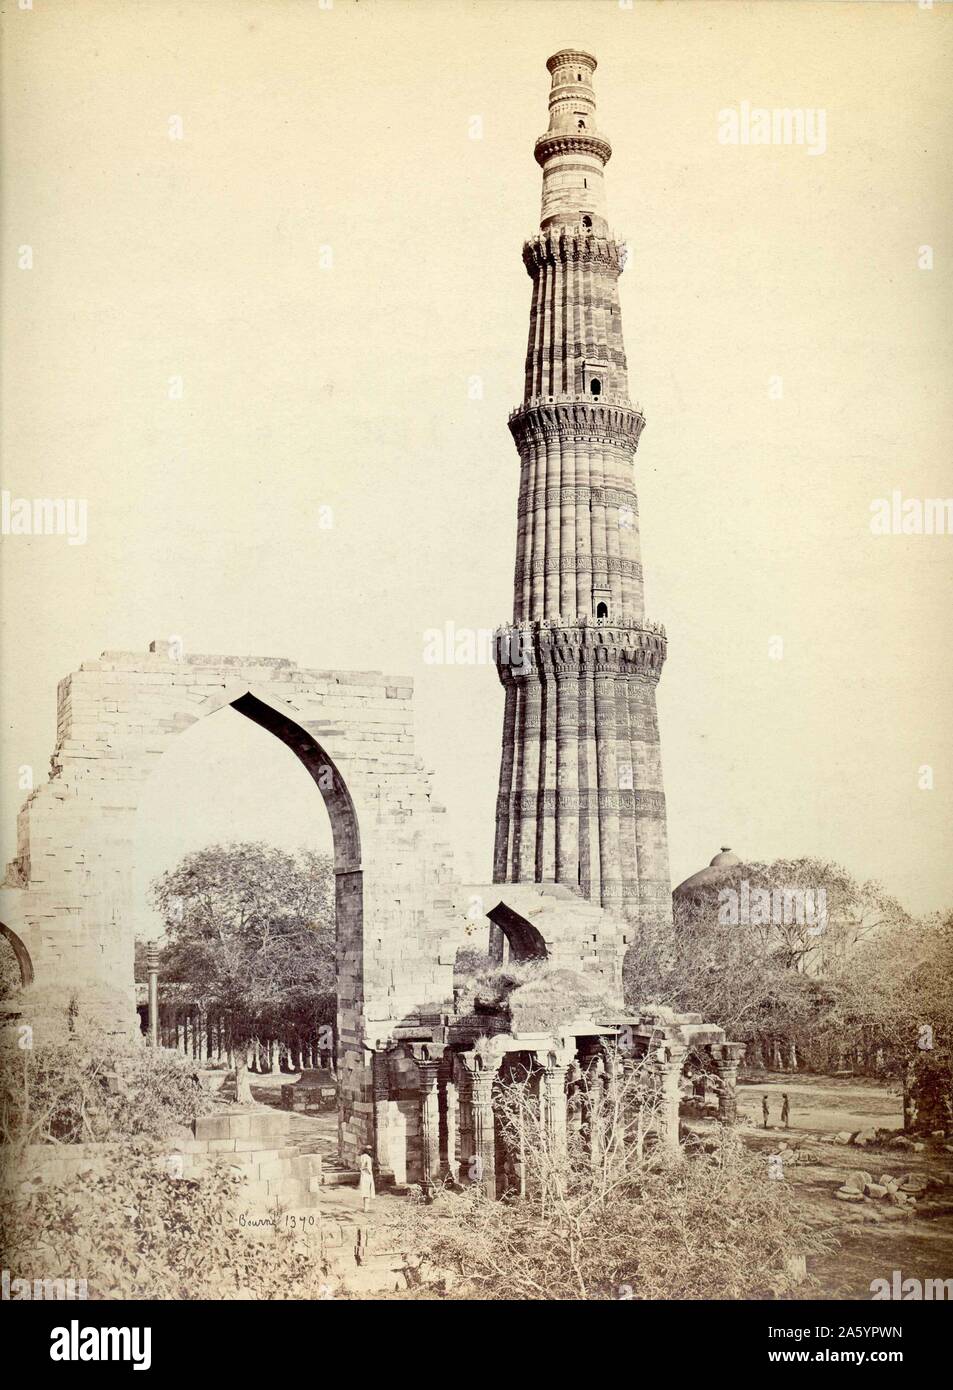 Qutb Minar in Delhi by Samuel Bourne (1834-1912). This fluted, red sandstone structure is the world's tallest brick minaret and was erected between 1193 and 1368. Stock Photo